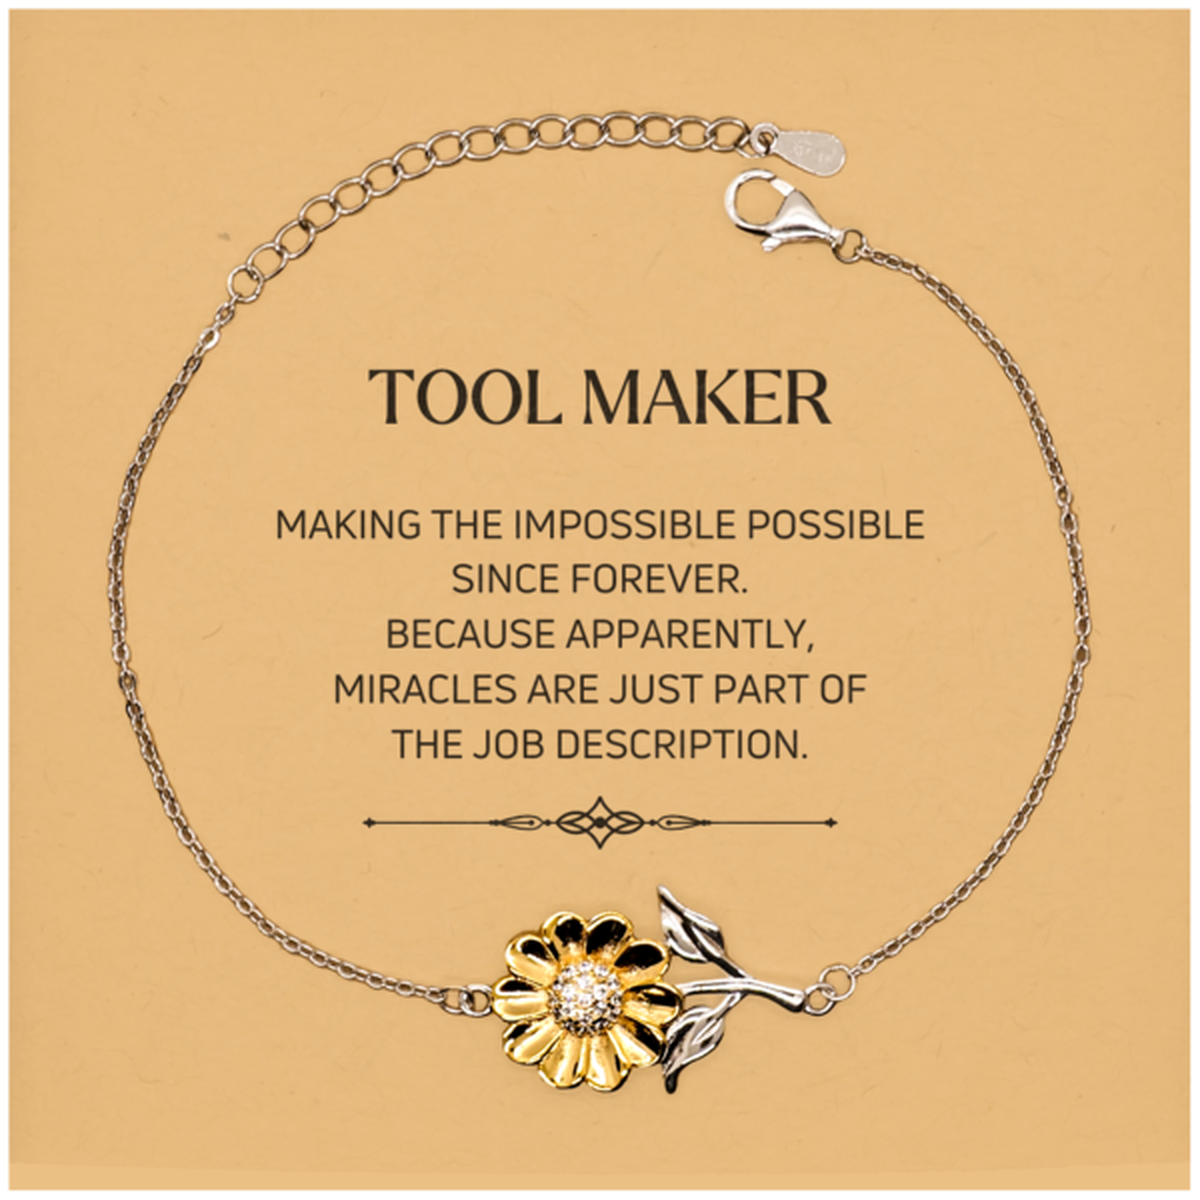 Funny Tool Maker Gifts, Miracles are just part of the job description, Inspirational Birthday Christmas Sunflower Bracelet For Tool Maker, Men, Women, Coworkers, Friends, Boss